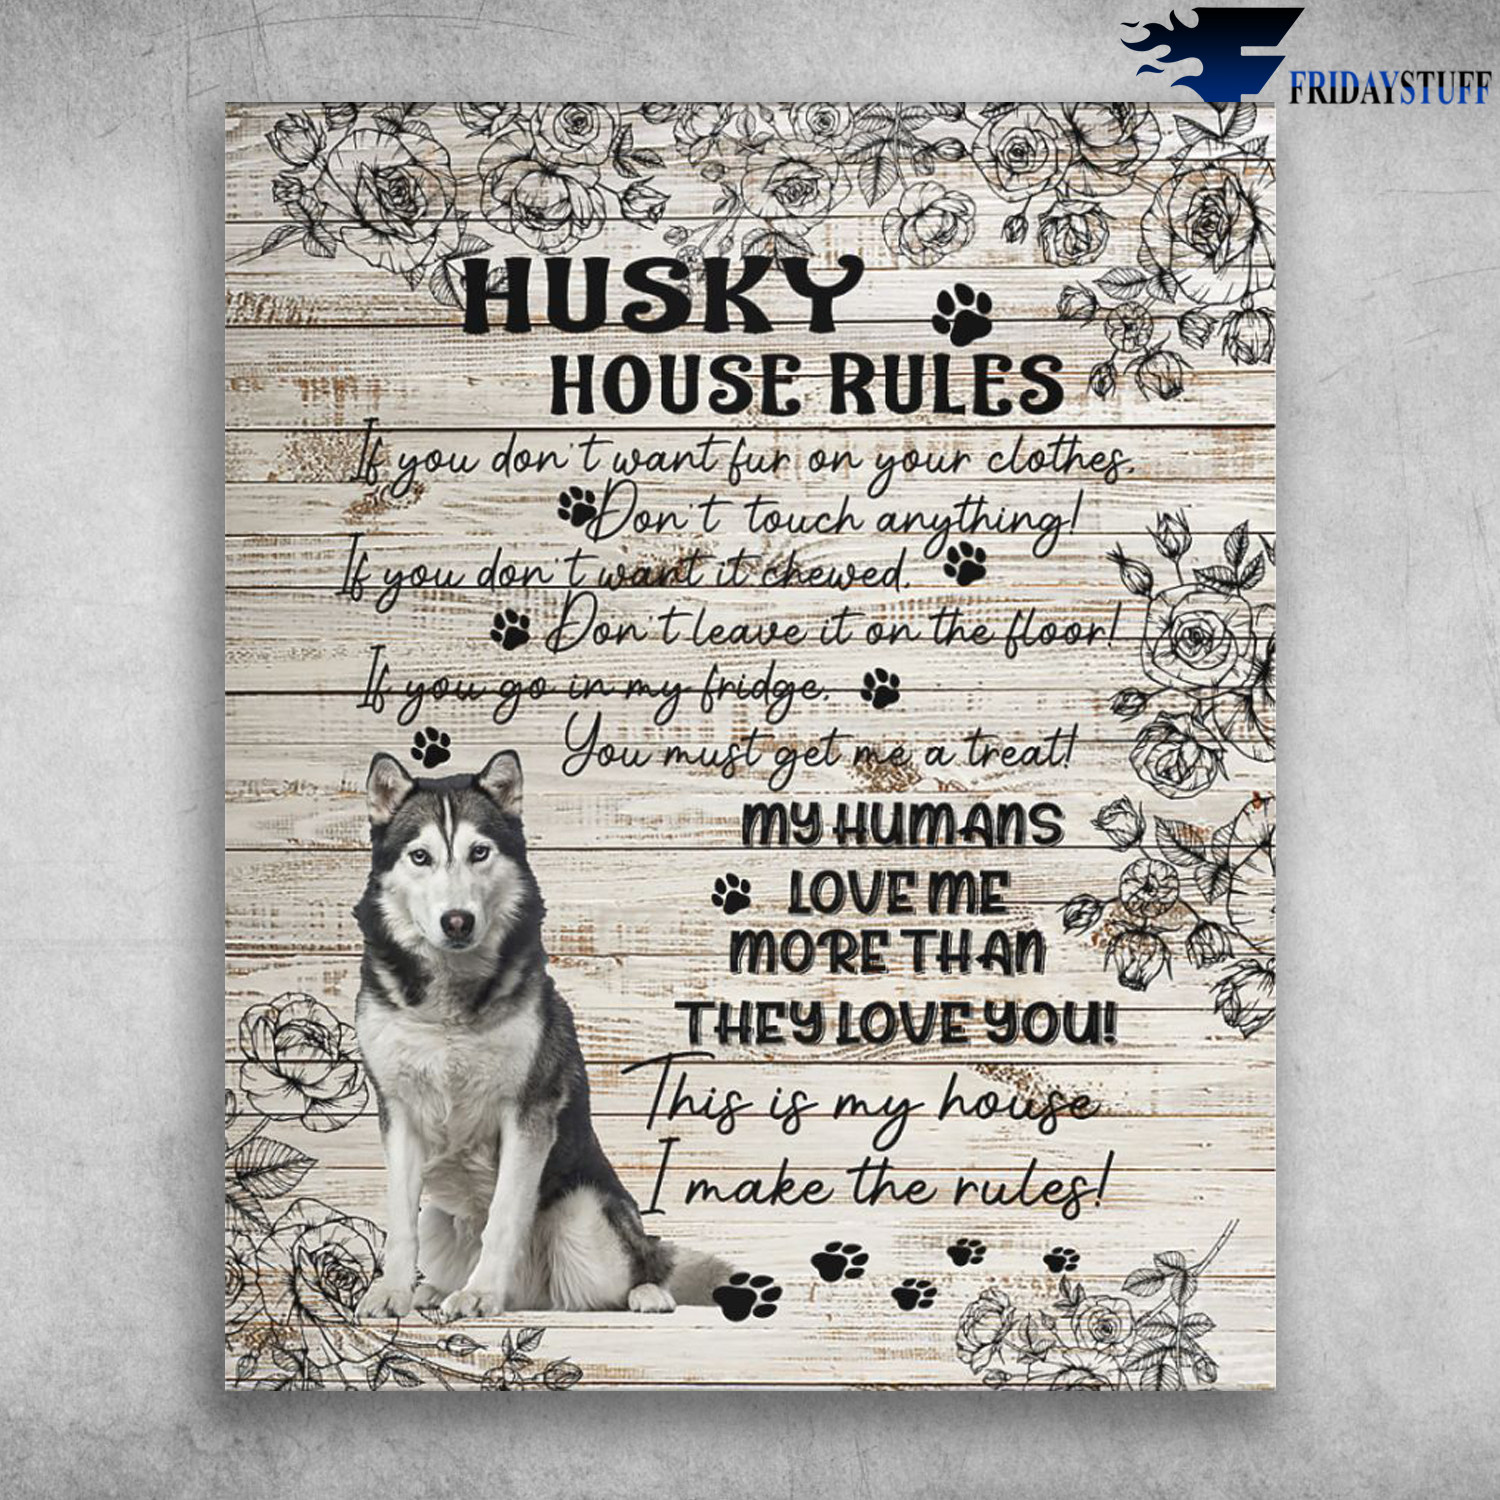 Husky House Rules - My Humans Love Me More Than They Love You